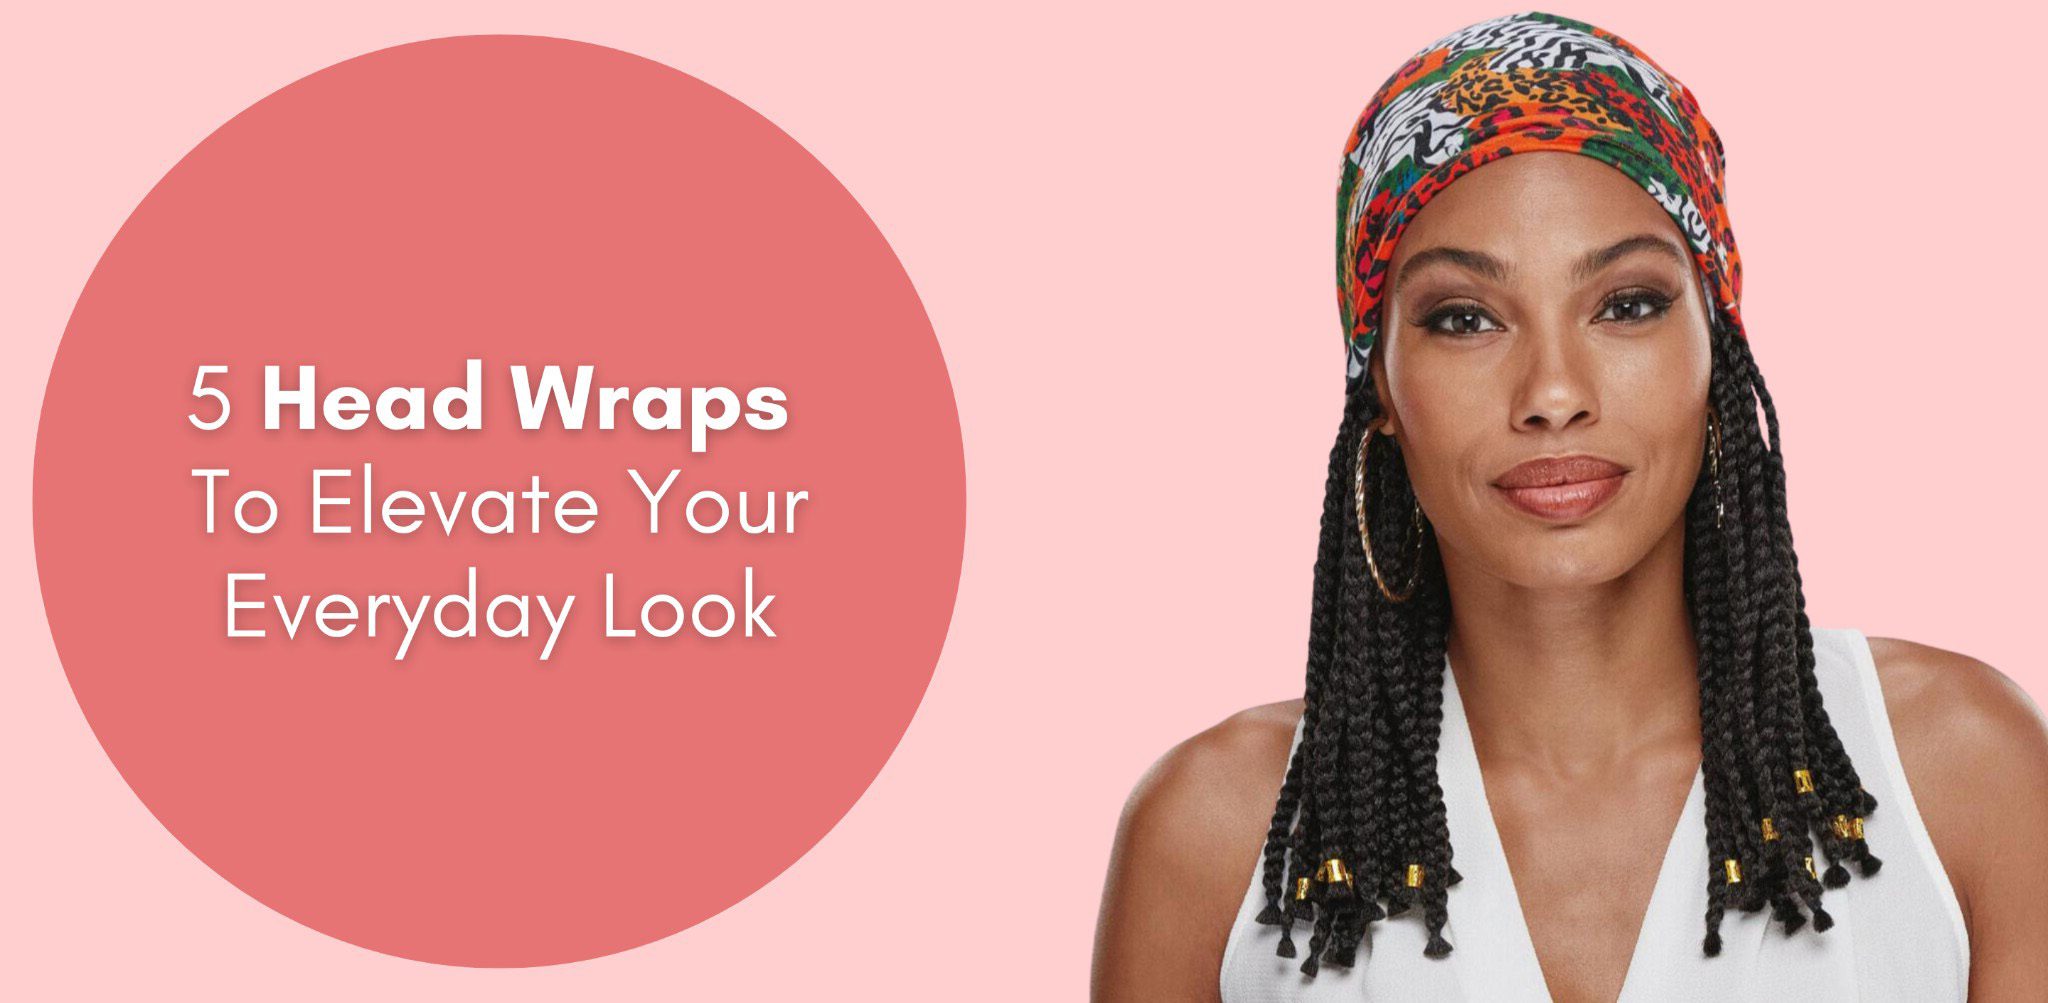 5 head wraps to elevate your everyday look